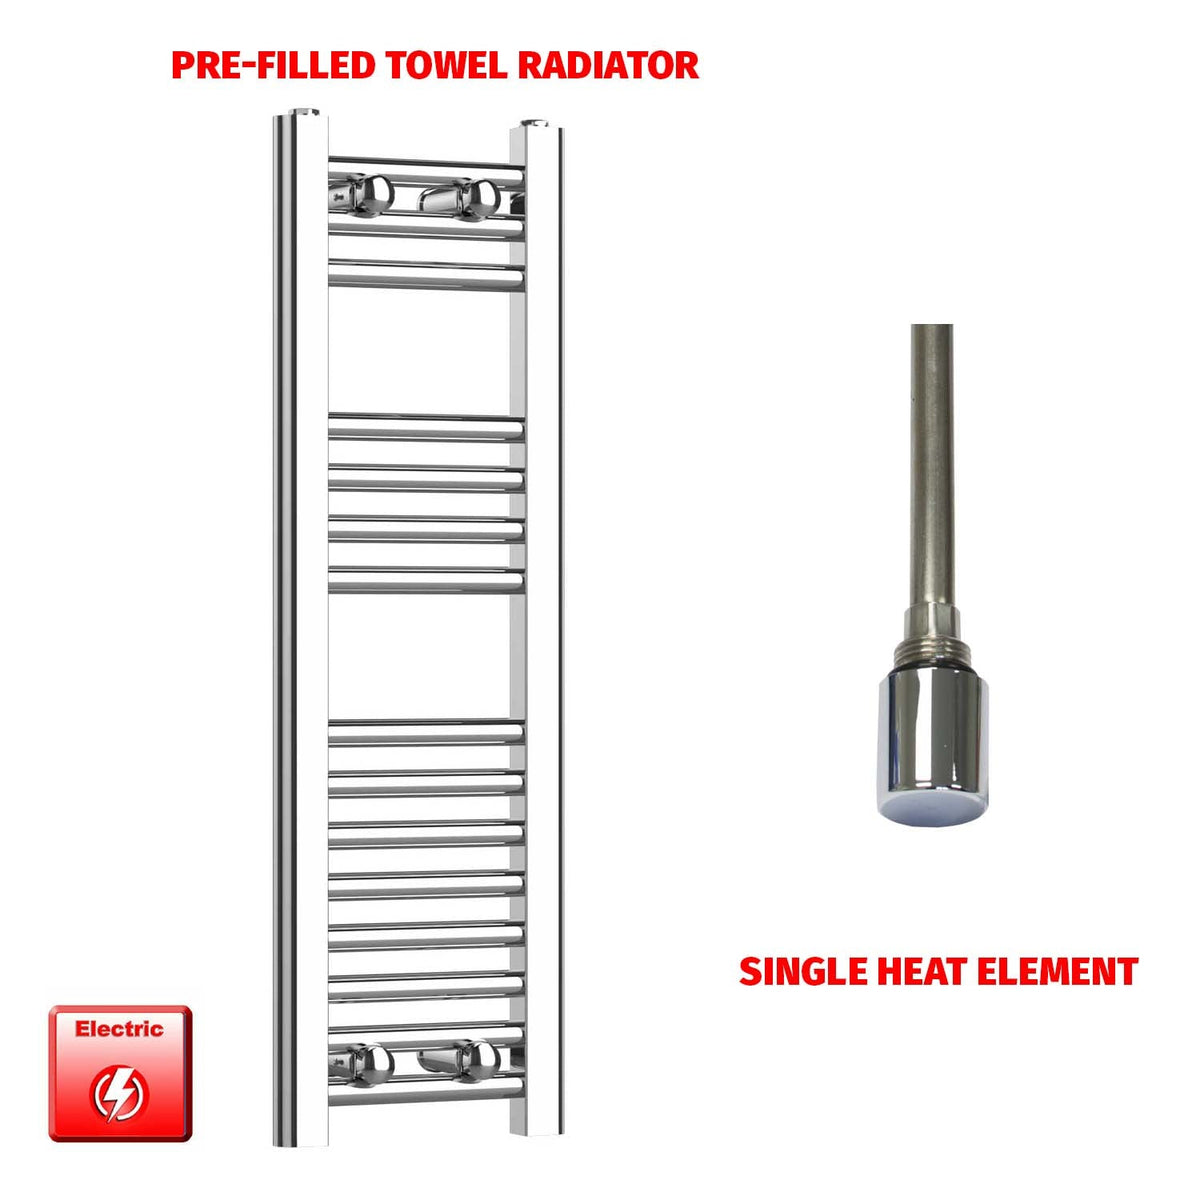 800 x 250 Pre-Filled Electric Heated Towel Radiator Straight Chrome Single Element